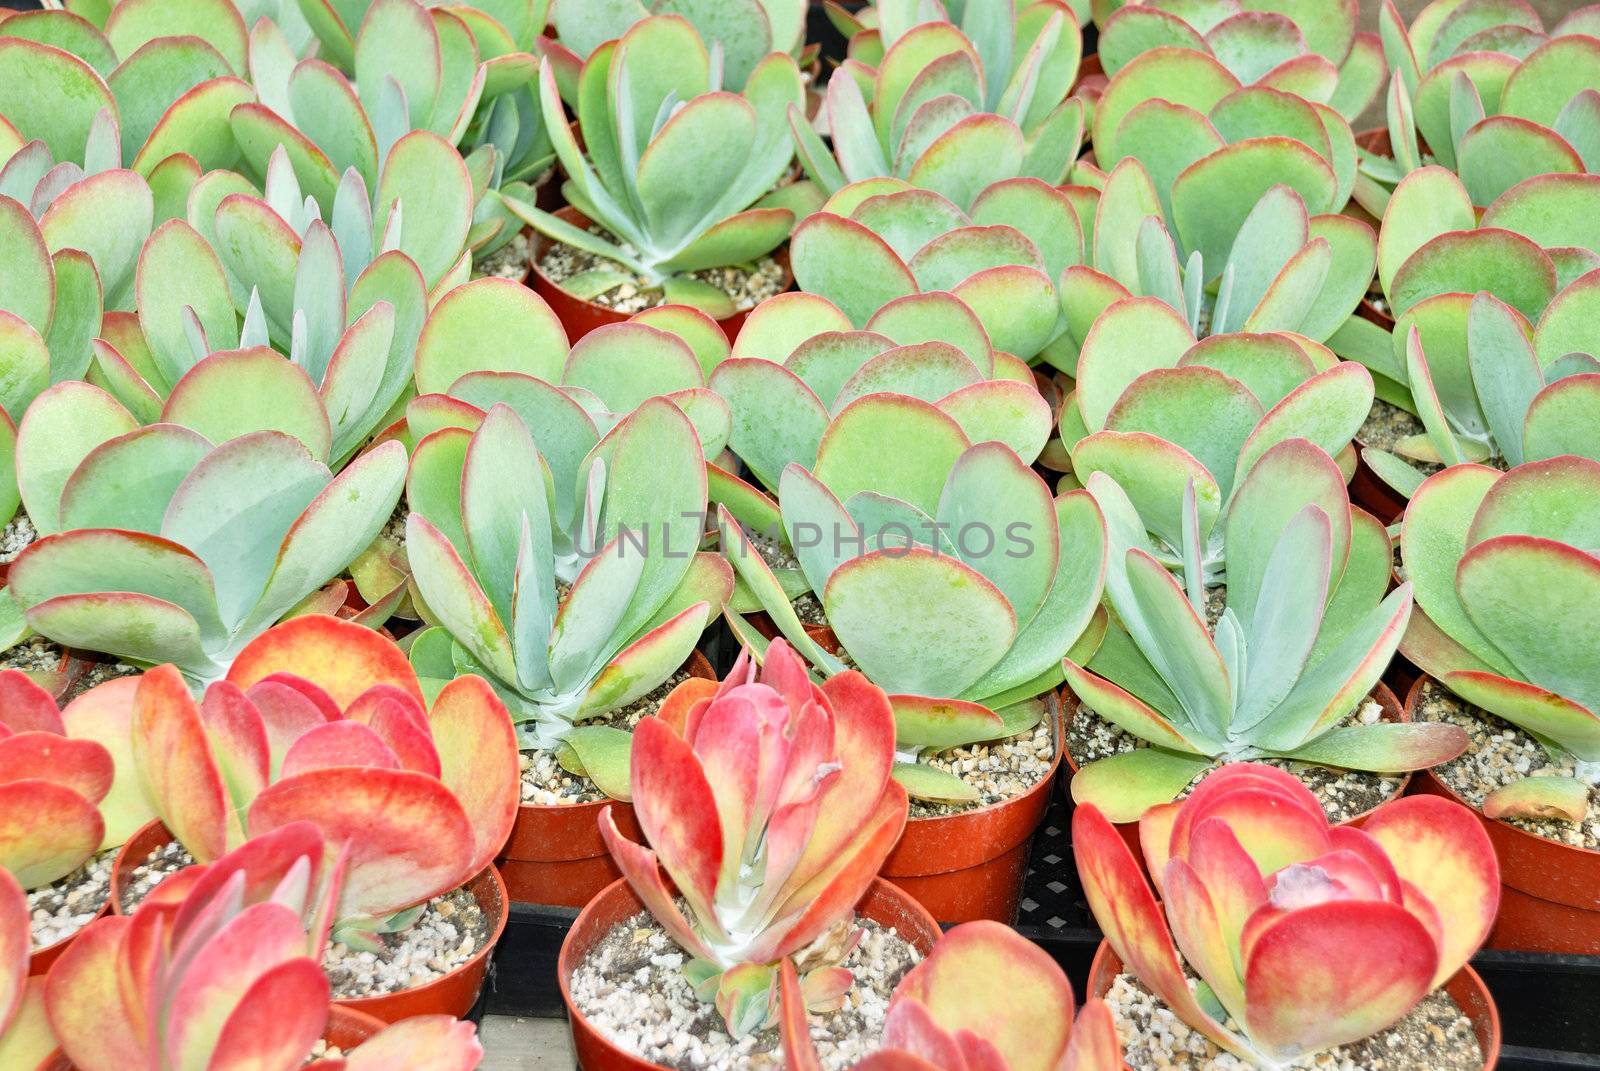 Group of young Kalanchoe thyrsiflora in a nursery.